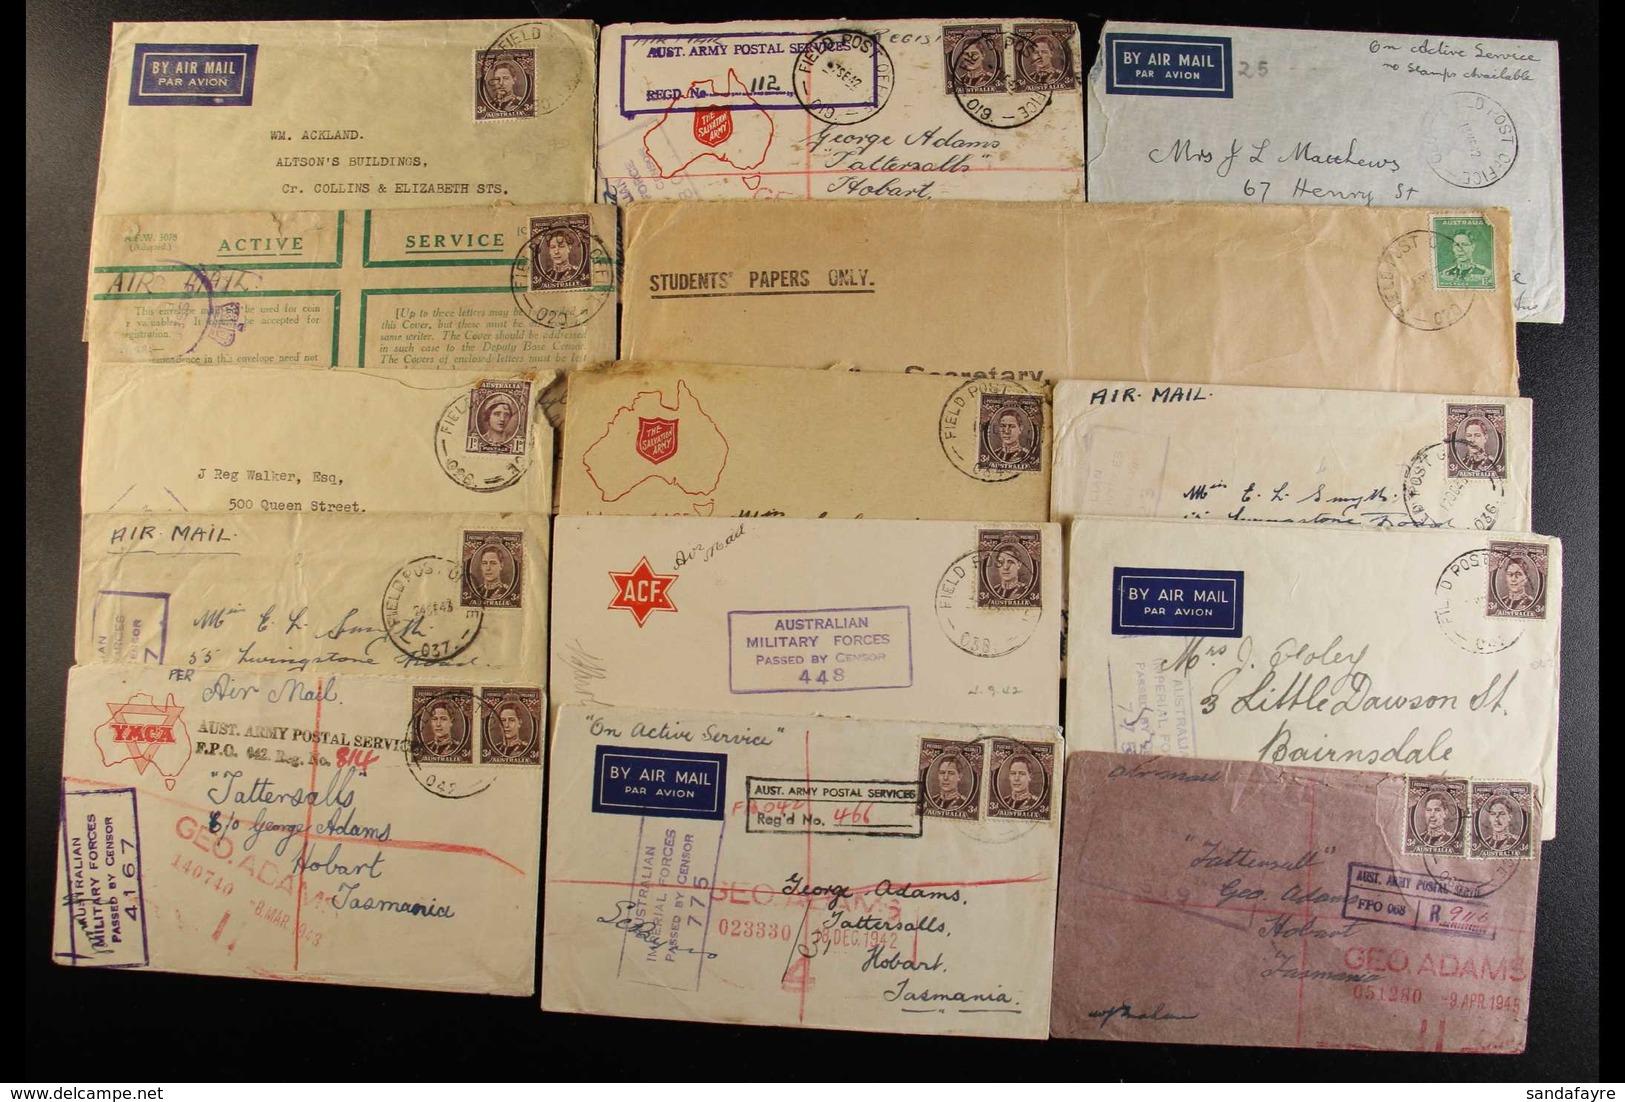 WW2 AUSTRALIAN FORCES - ZERO PREFIXES - FIELD POST OFFICES A Fine Collection Of Covers Back To Australia, Or One To NZ,  - Papouasie-Nouvelle-Guinée